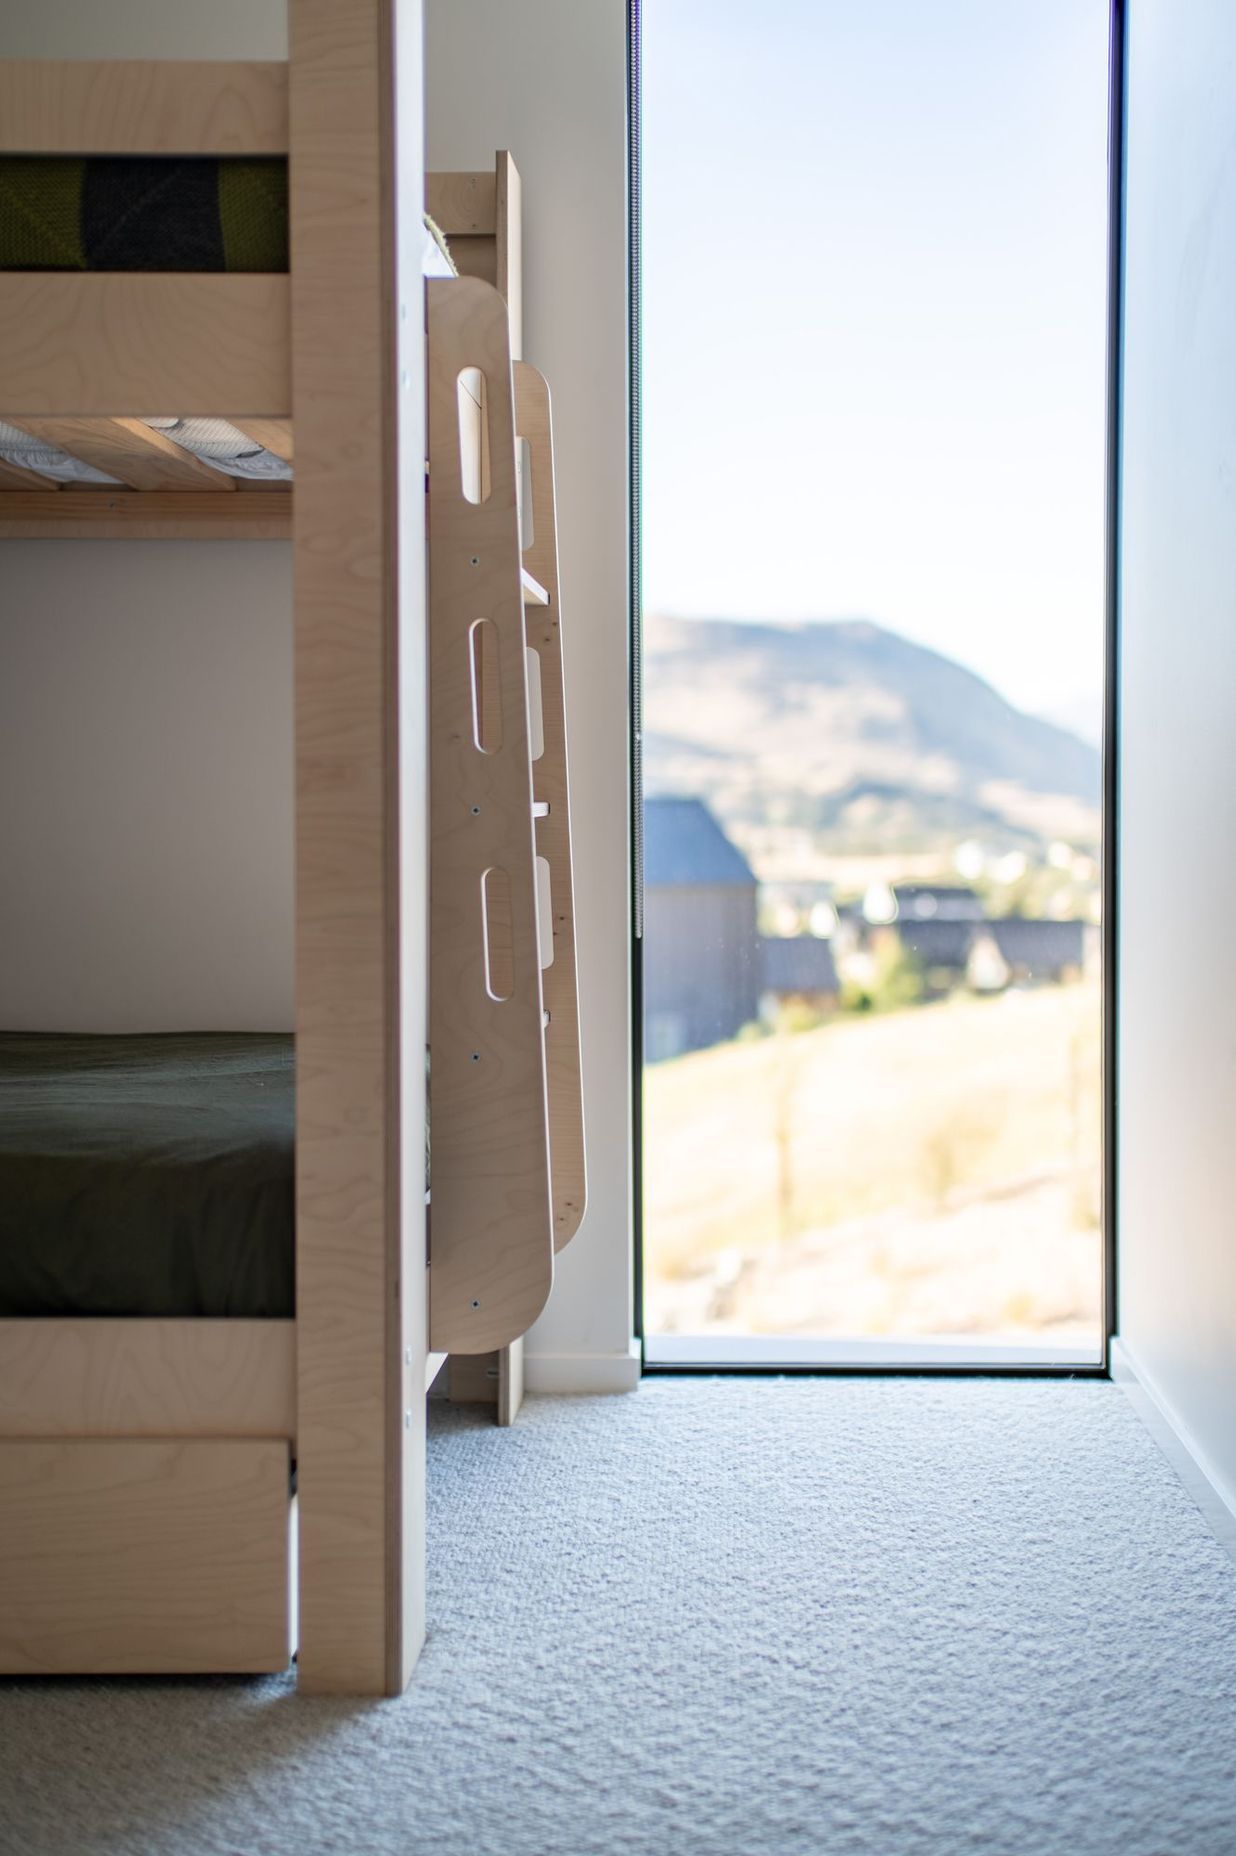 A child's bedroom features a slot window to take in light and scenery.